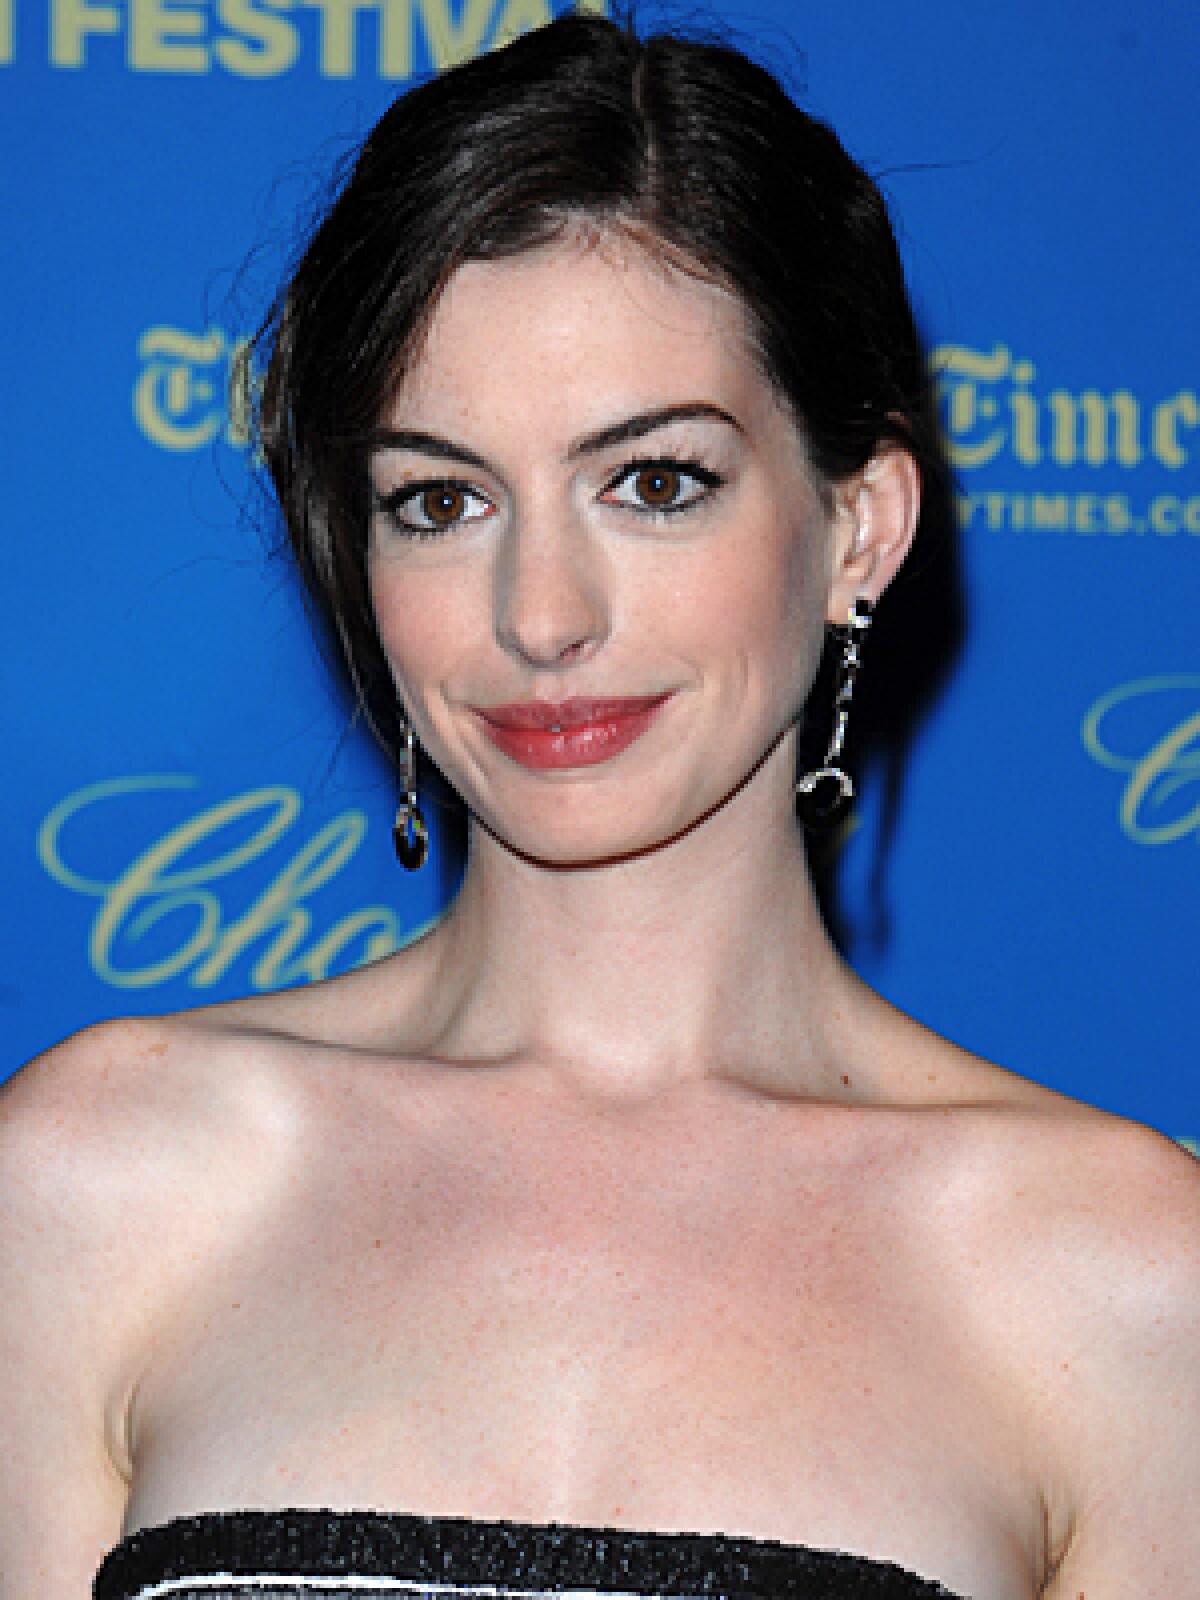 Anne Hathaway is among the celebrities enlisted by Creative Coalition.